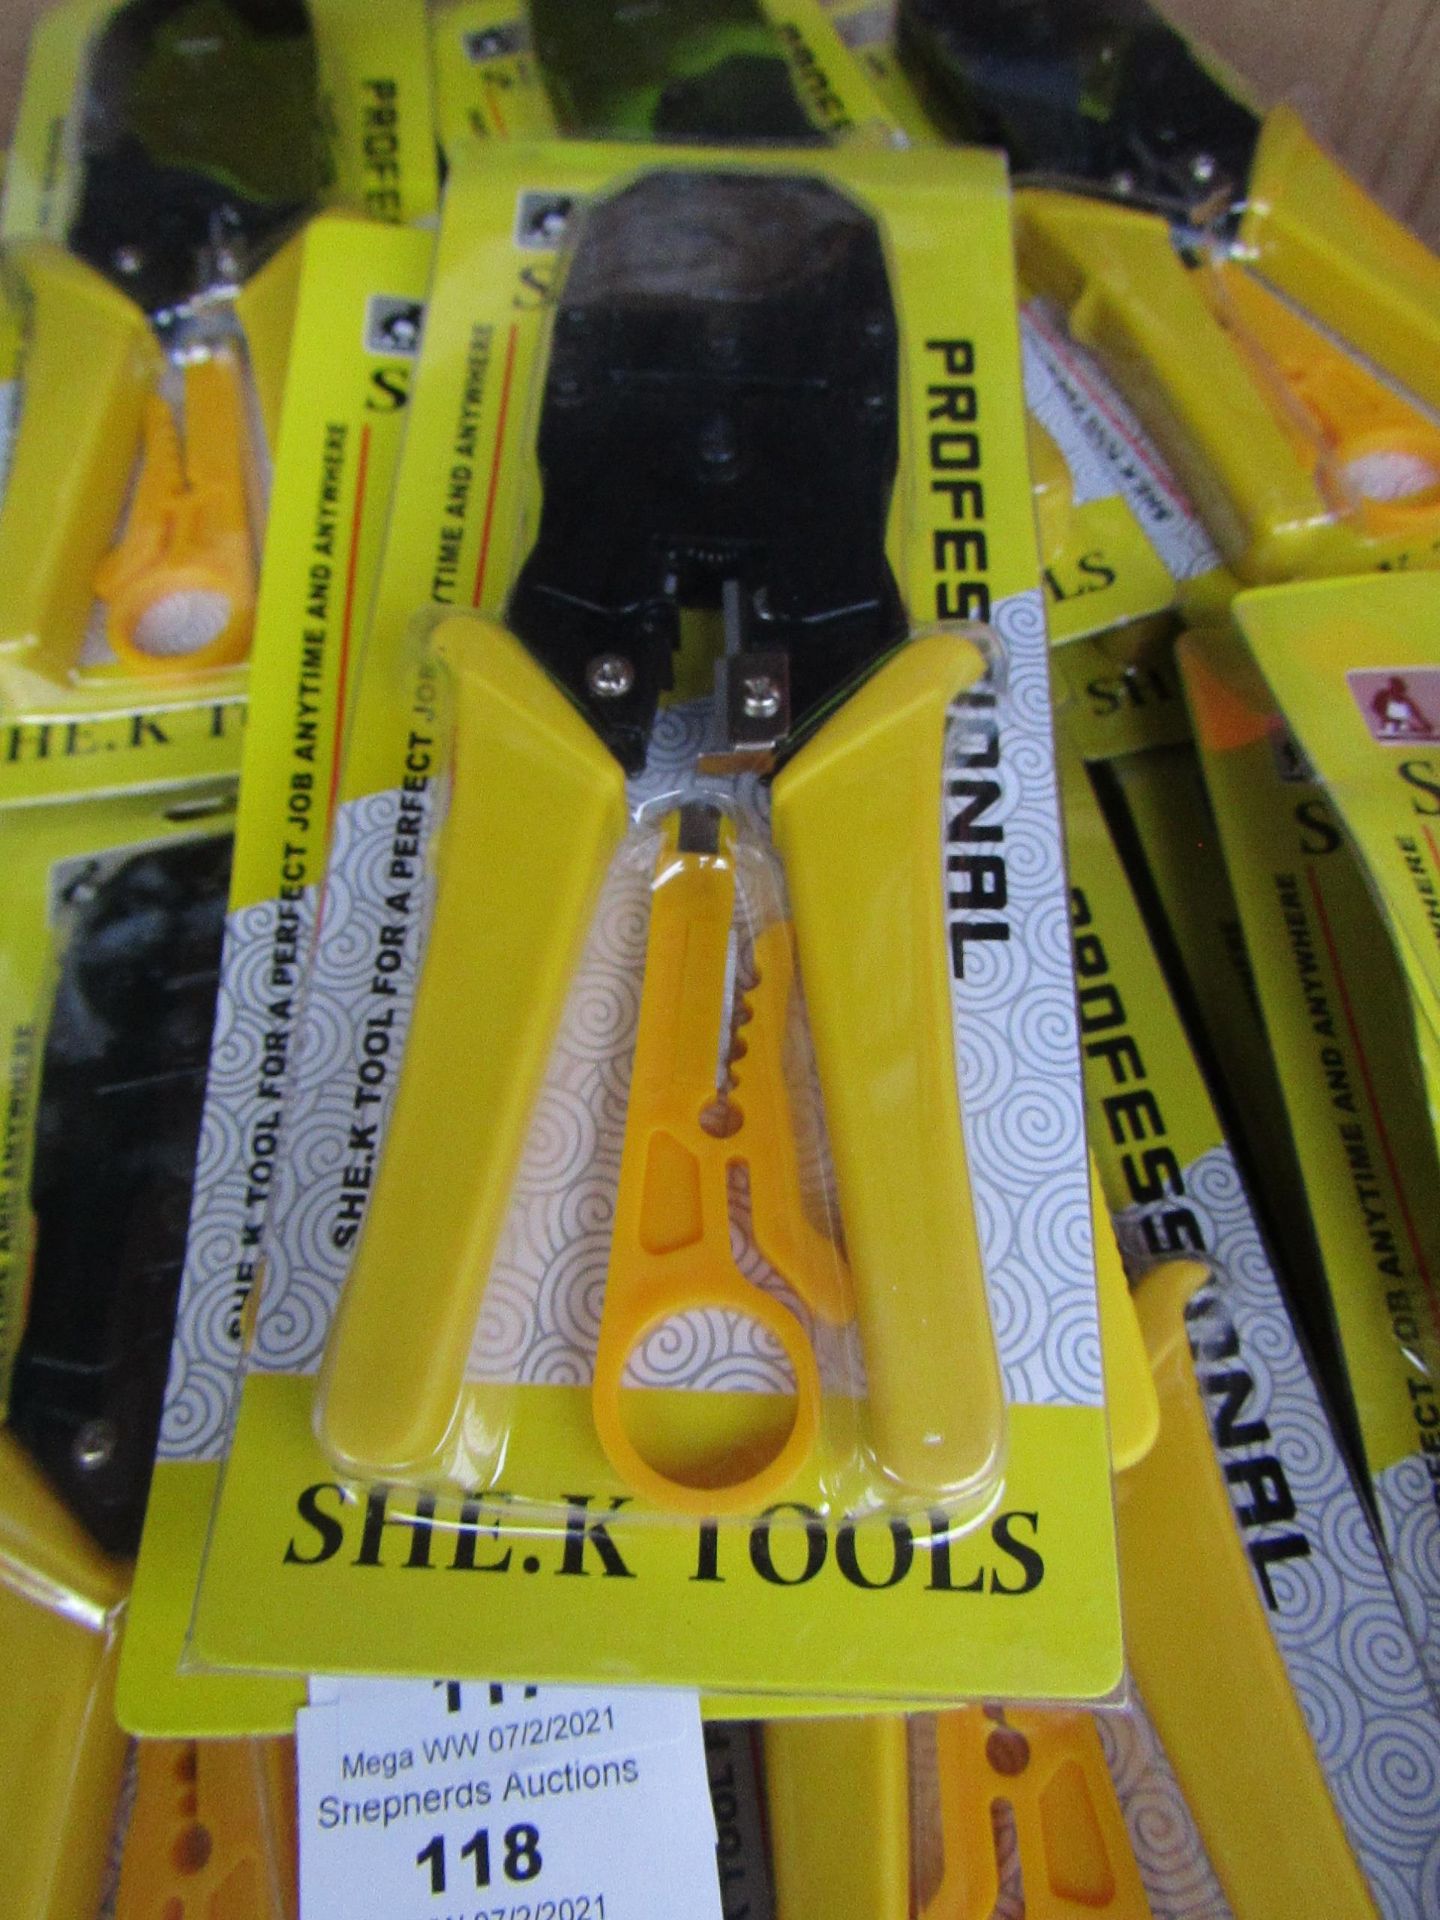 SHE.K - Professional Cable Clippers - New & Packaged.